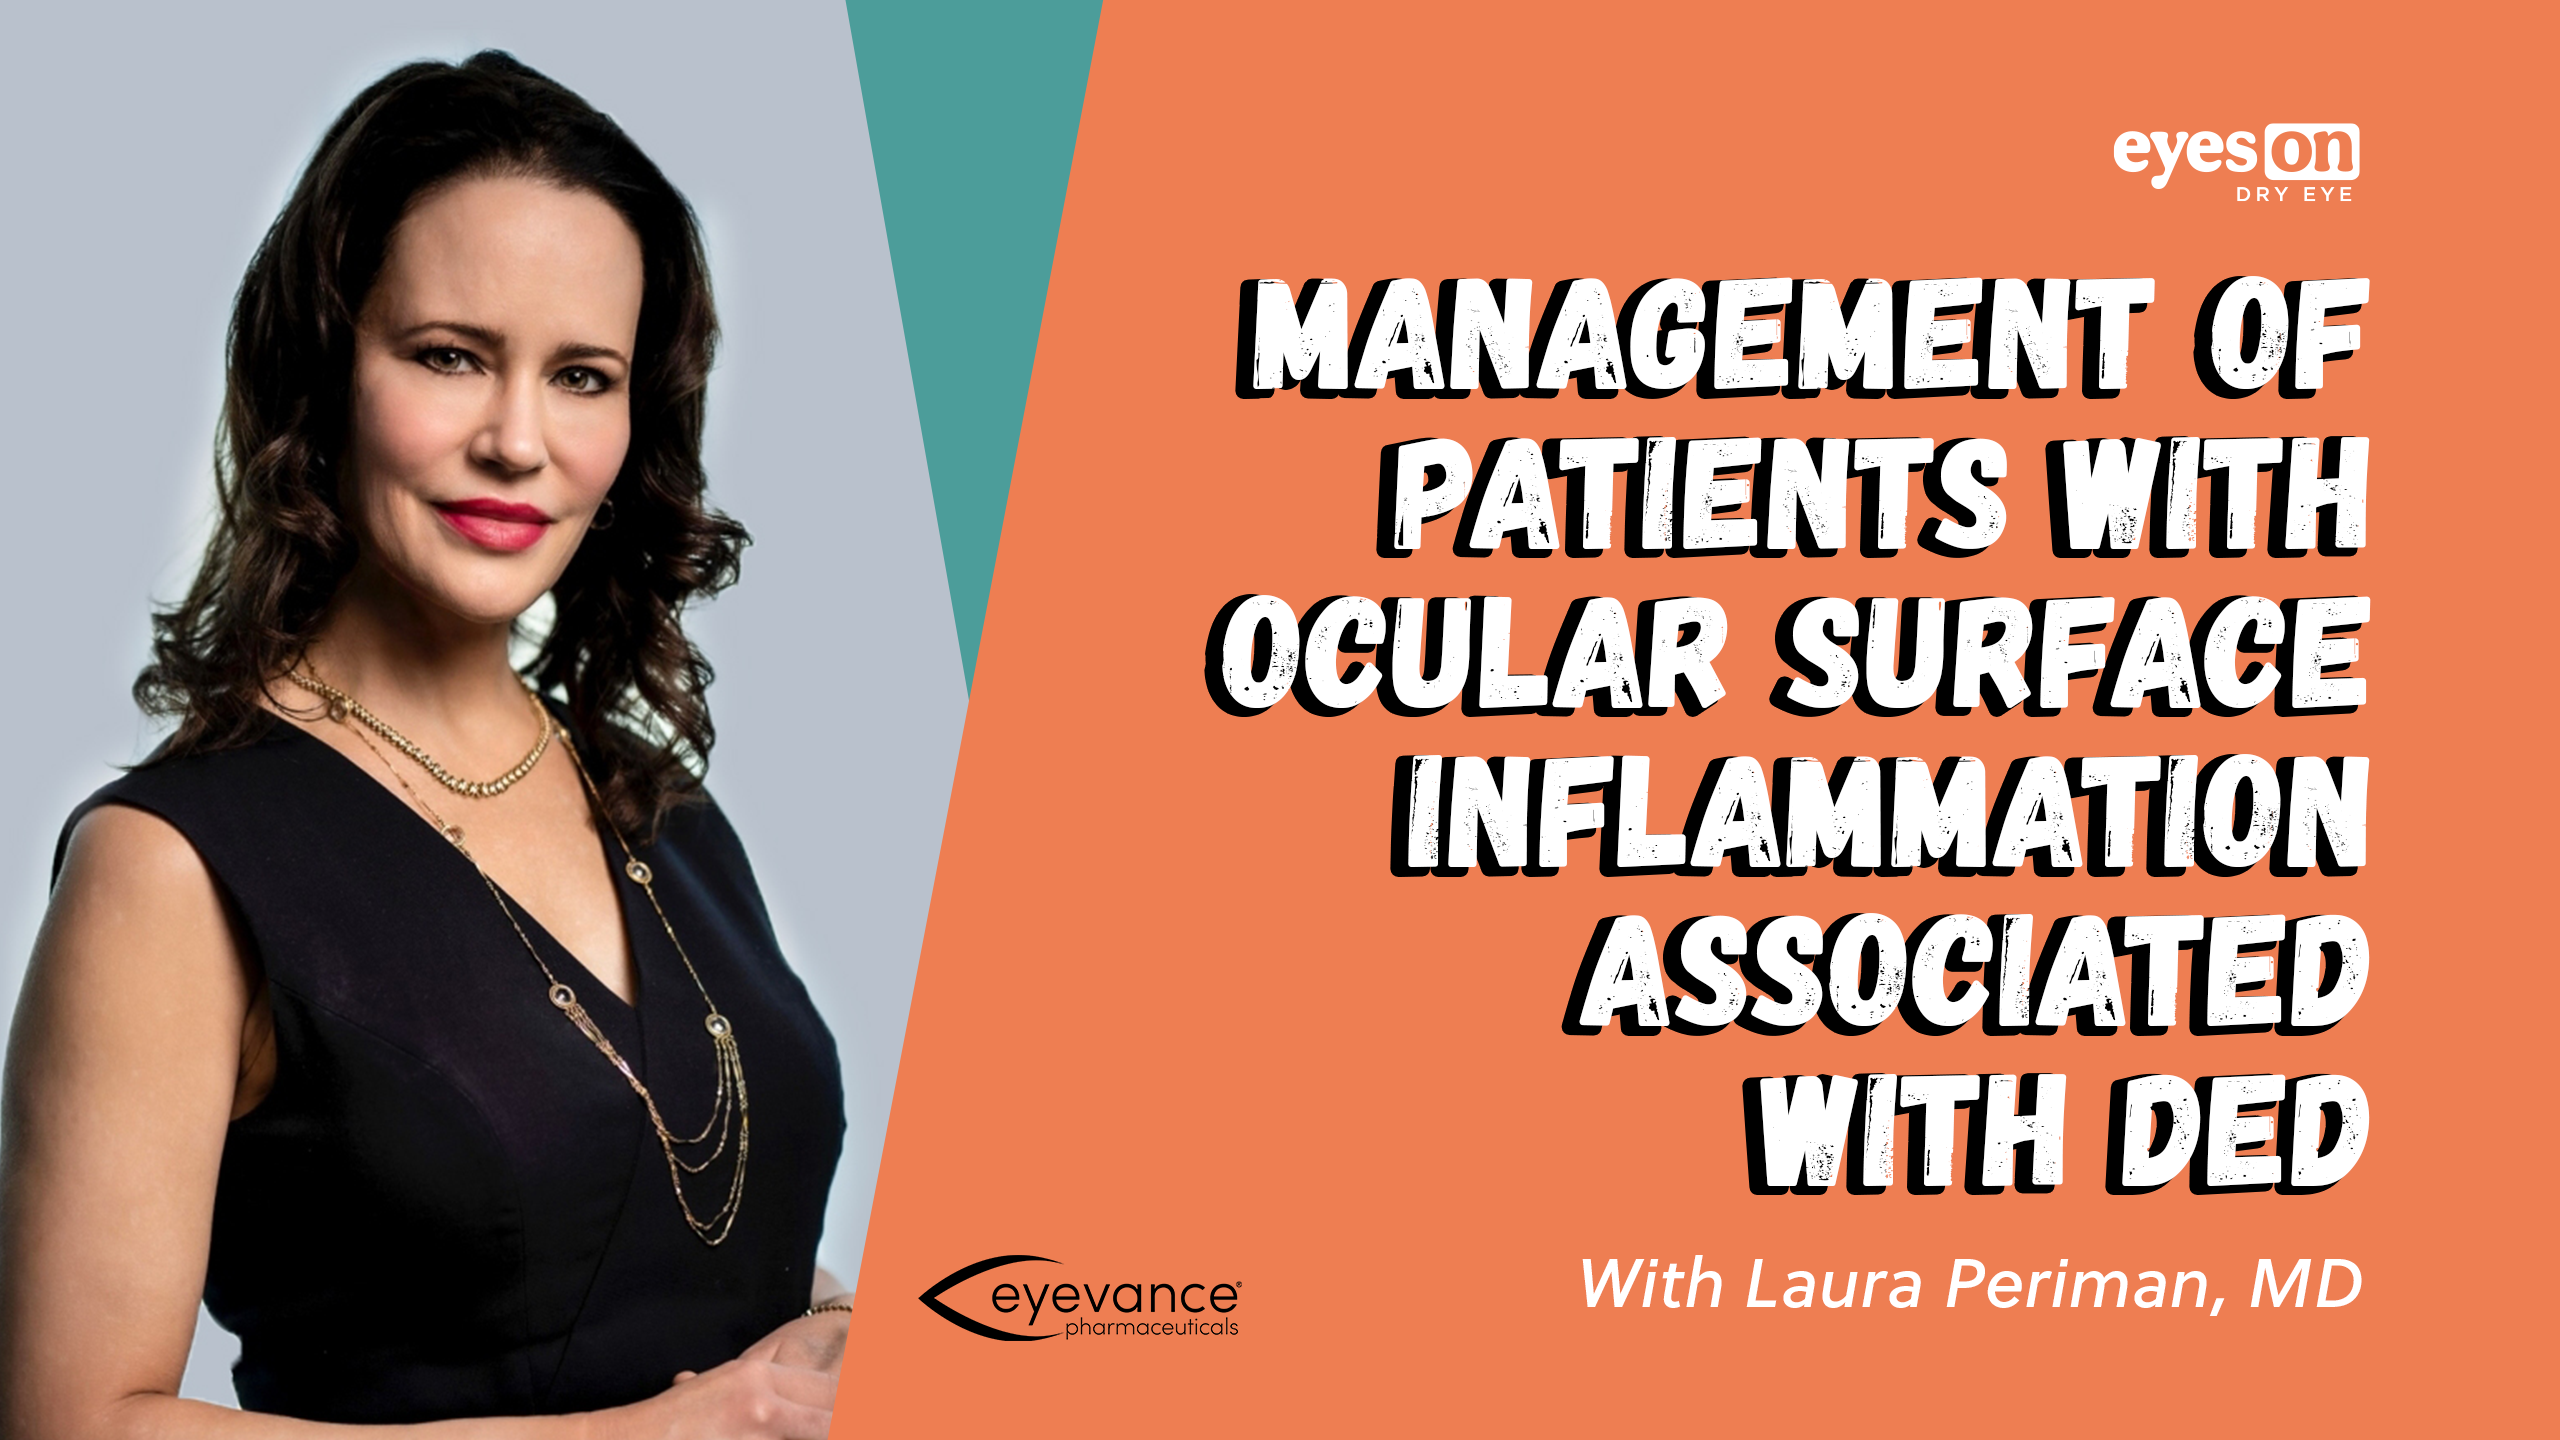 Live Discussion with Laura Periman, MD - Management of Patients with Ocular Surface Inflammation Associated with DED